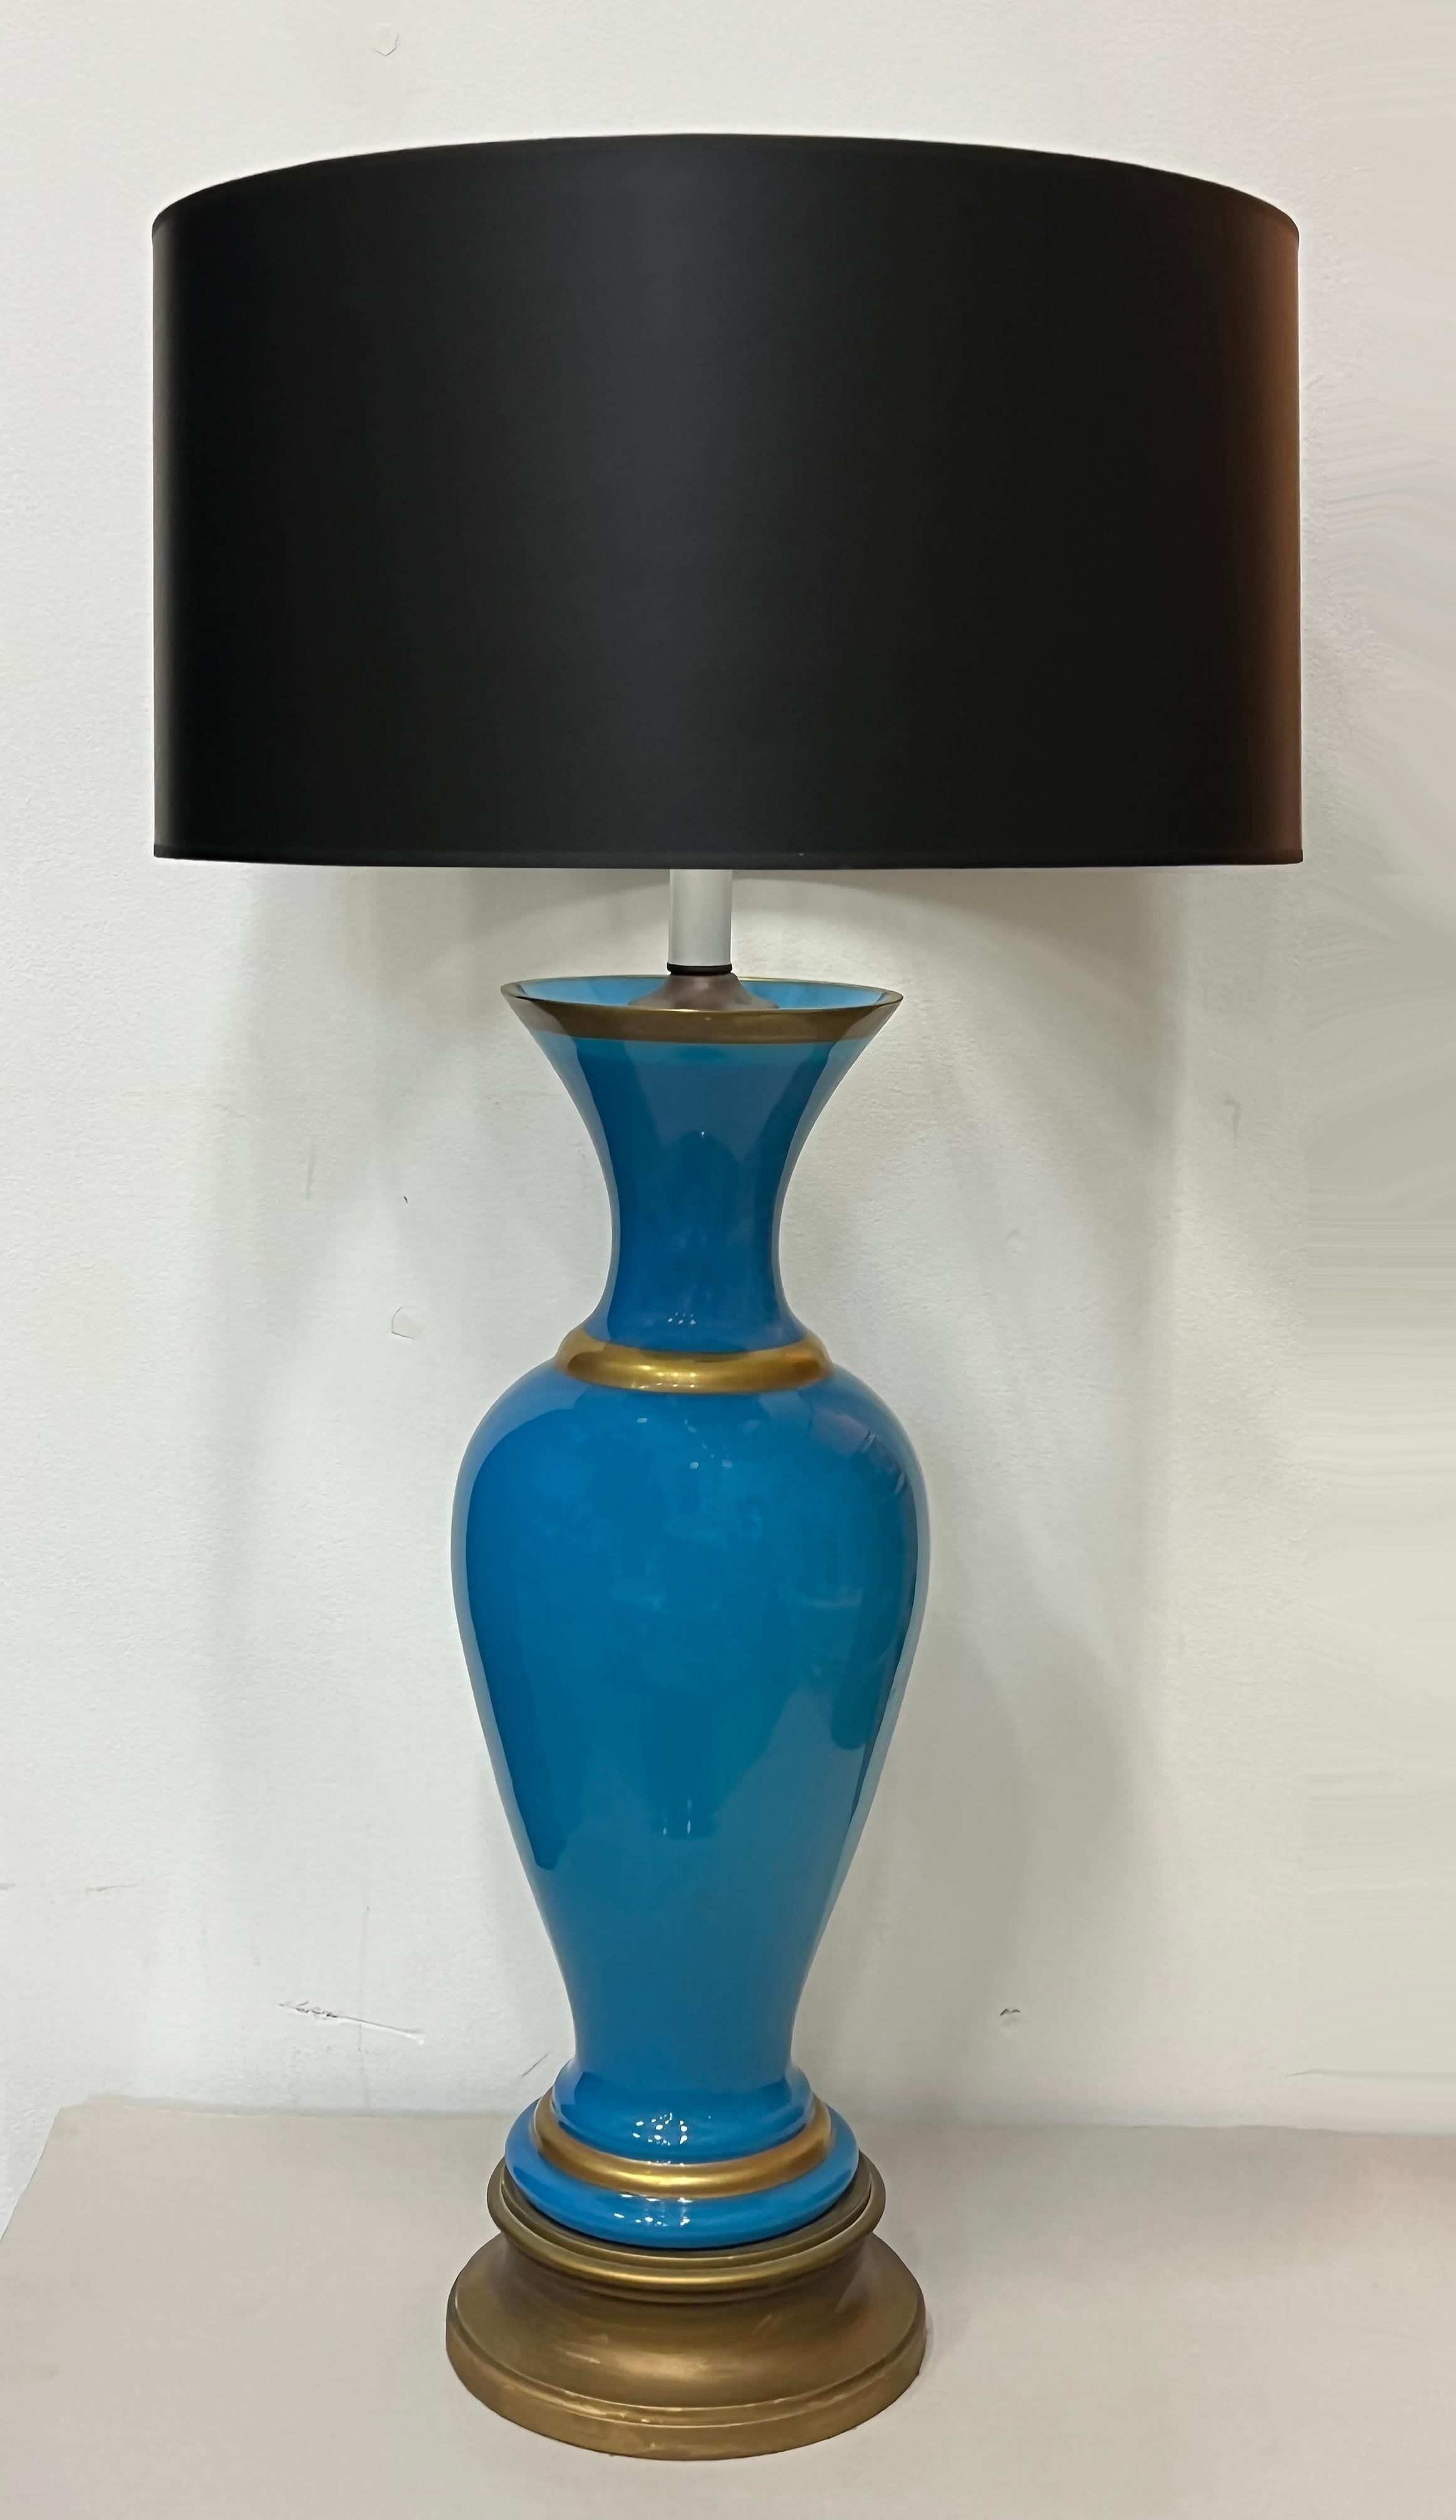 Painted 1950s French Blue Opaline Glass Table Lamps With Gilt Details, Pair For Sale